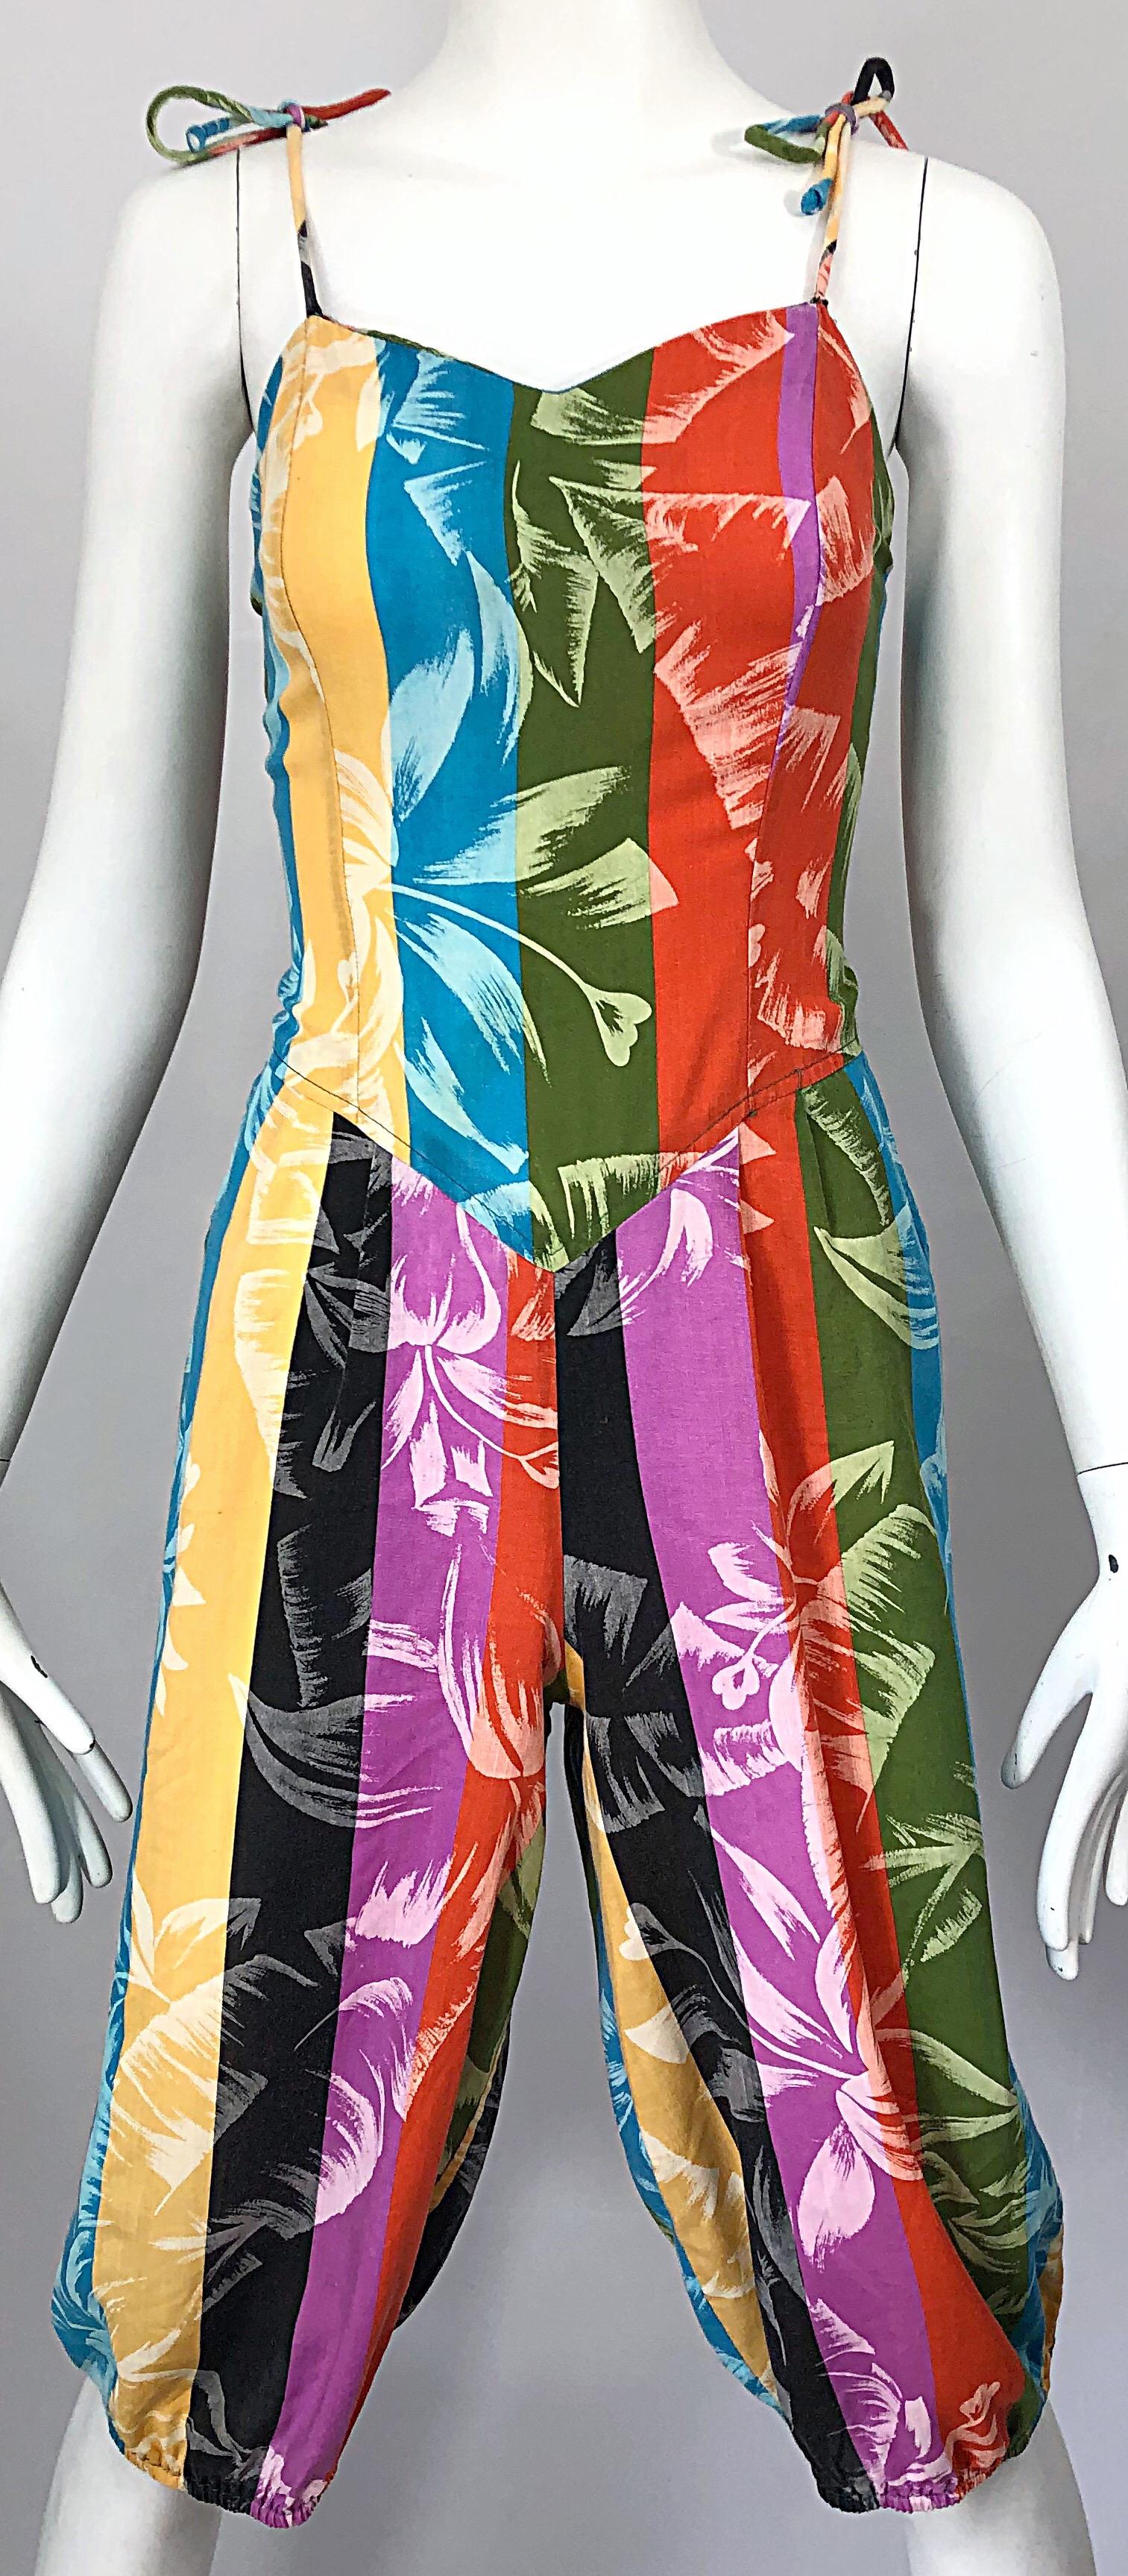 Rare 1950s tropical print lightweight cotton colorful one piece harem jumpsuit ( possibly Claire McCardell )! Features vibrant colors of purple, orange, blue, green, yellow, and black throughout. Ties at each shoulder strap to adjust length. POCKETS